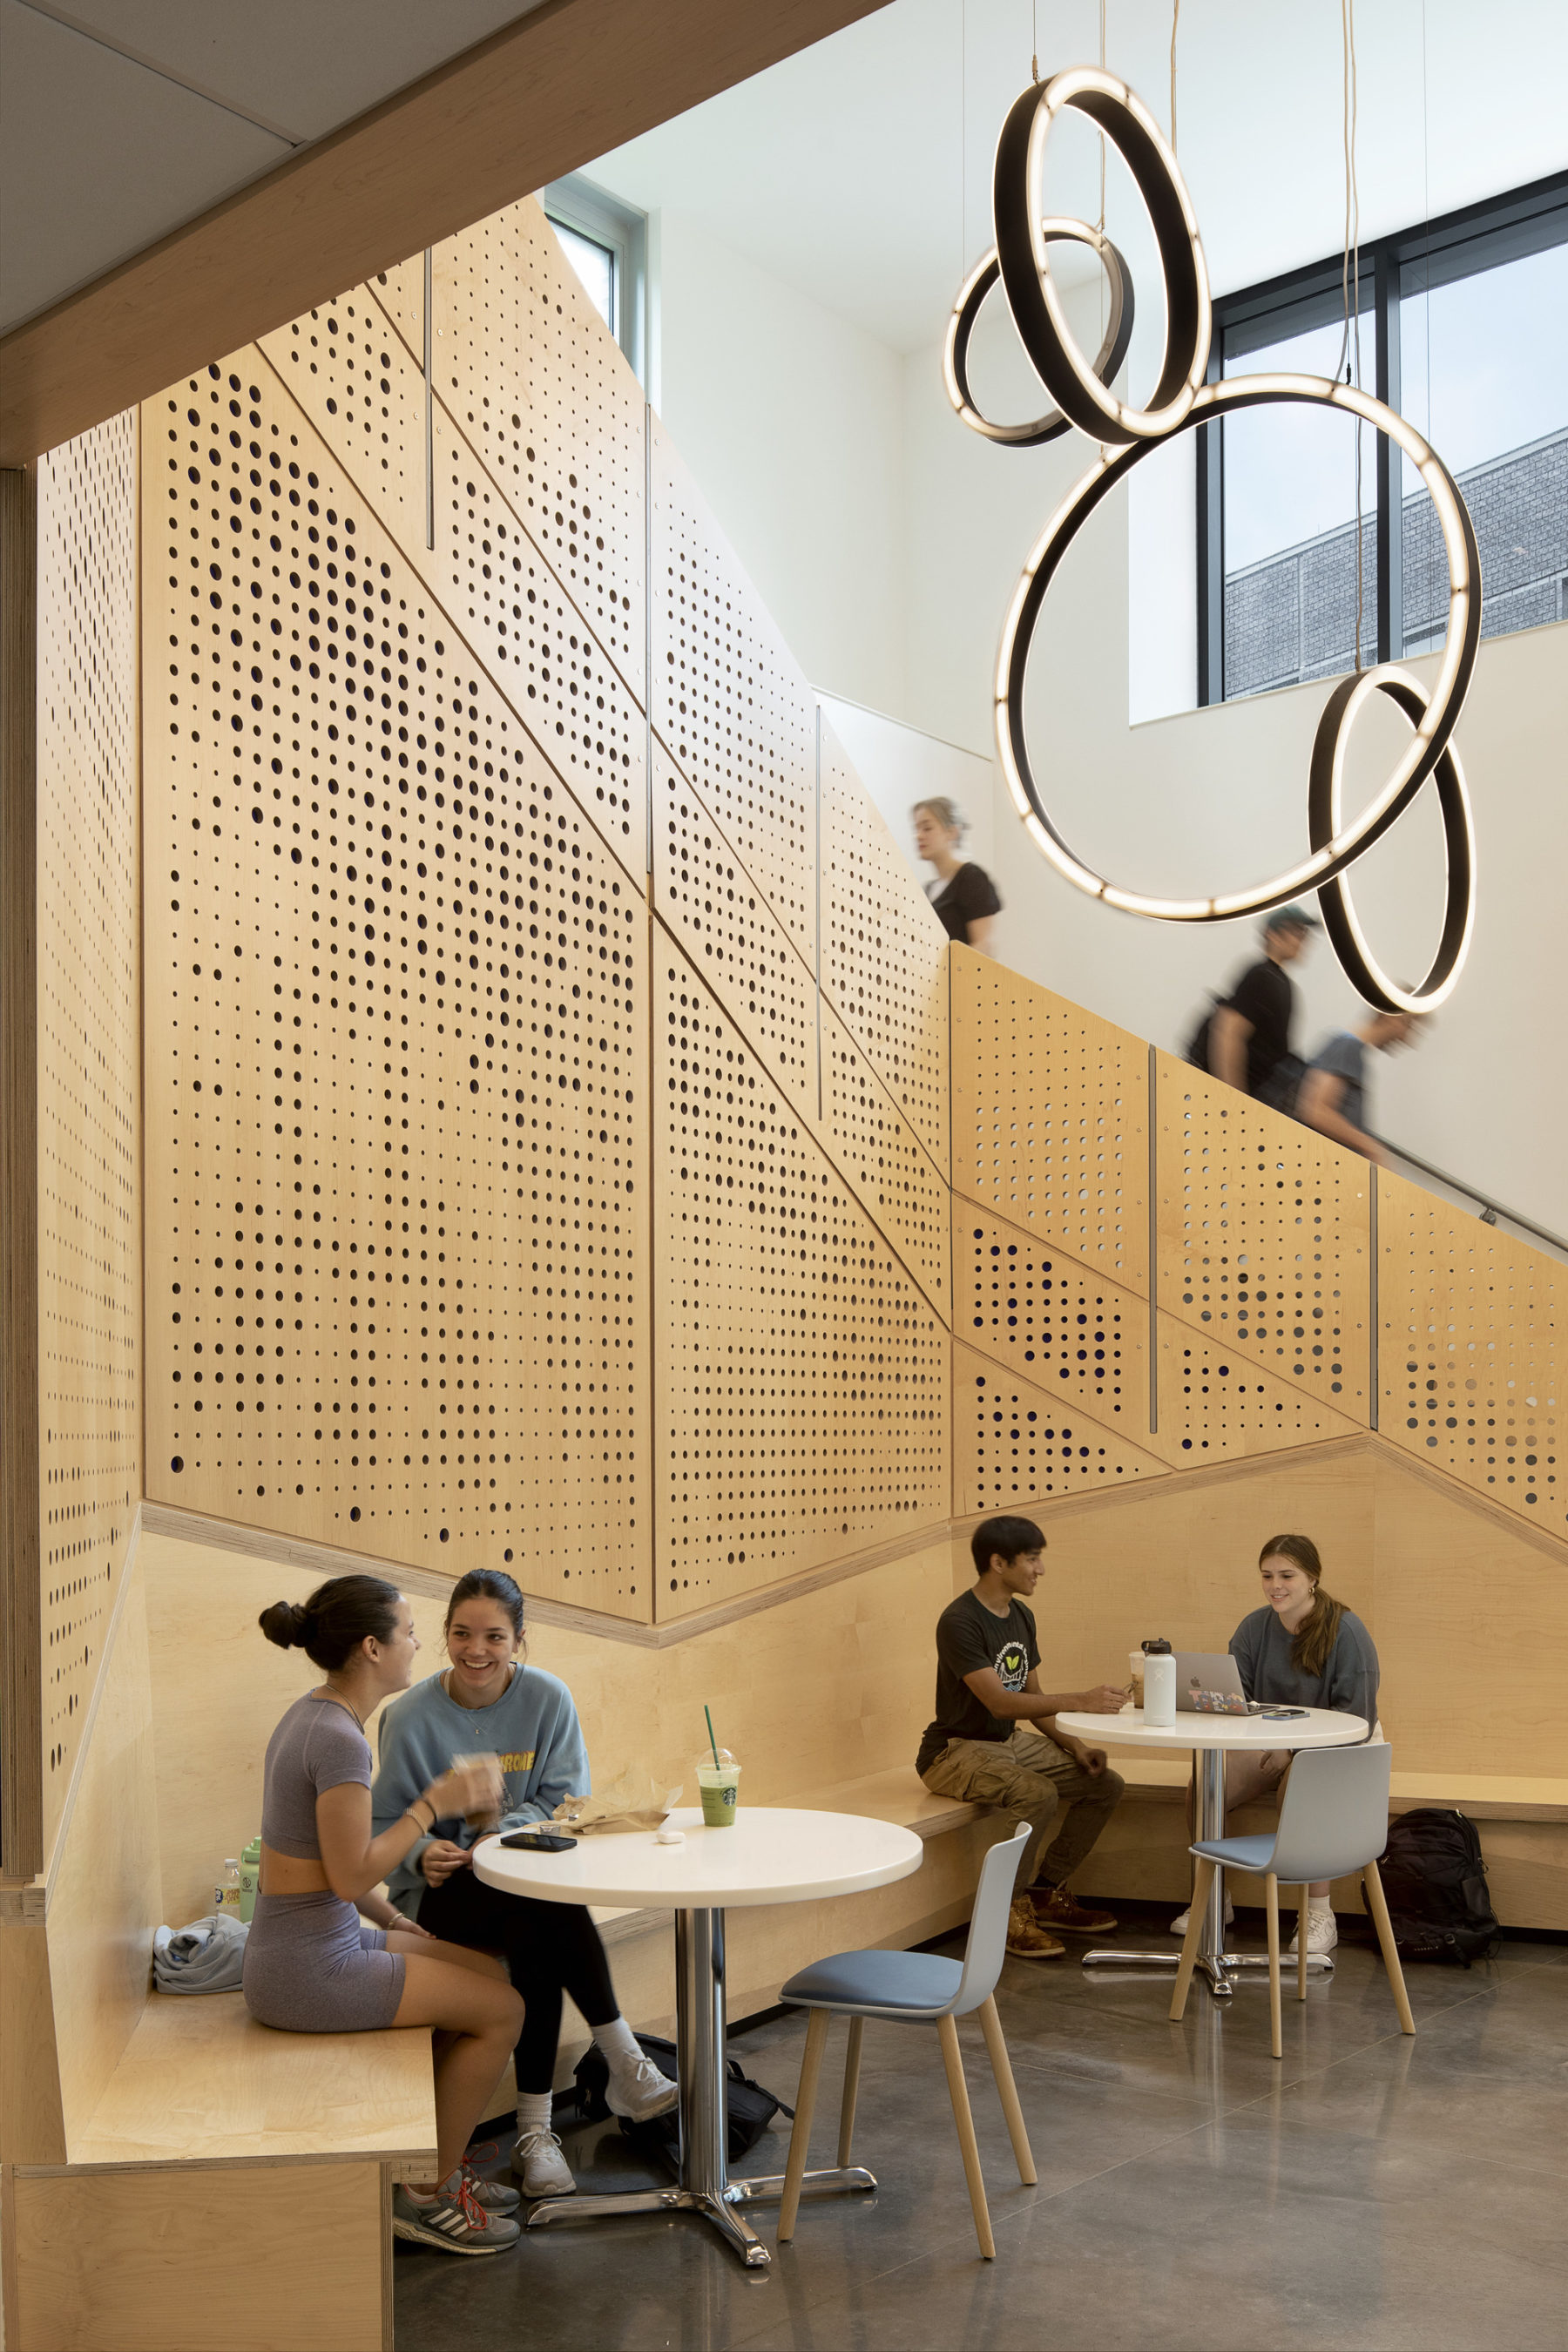 interior photo of students sitting in cafe area in nook framed by staircase